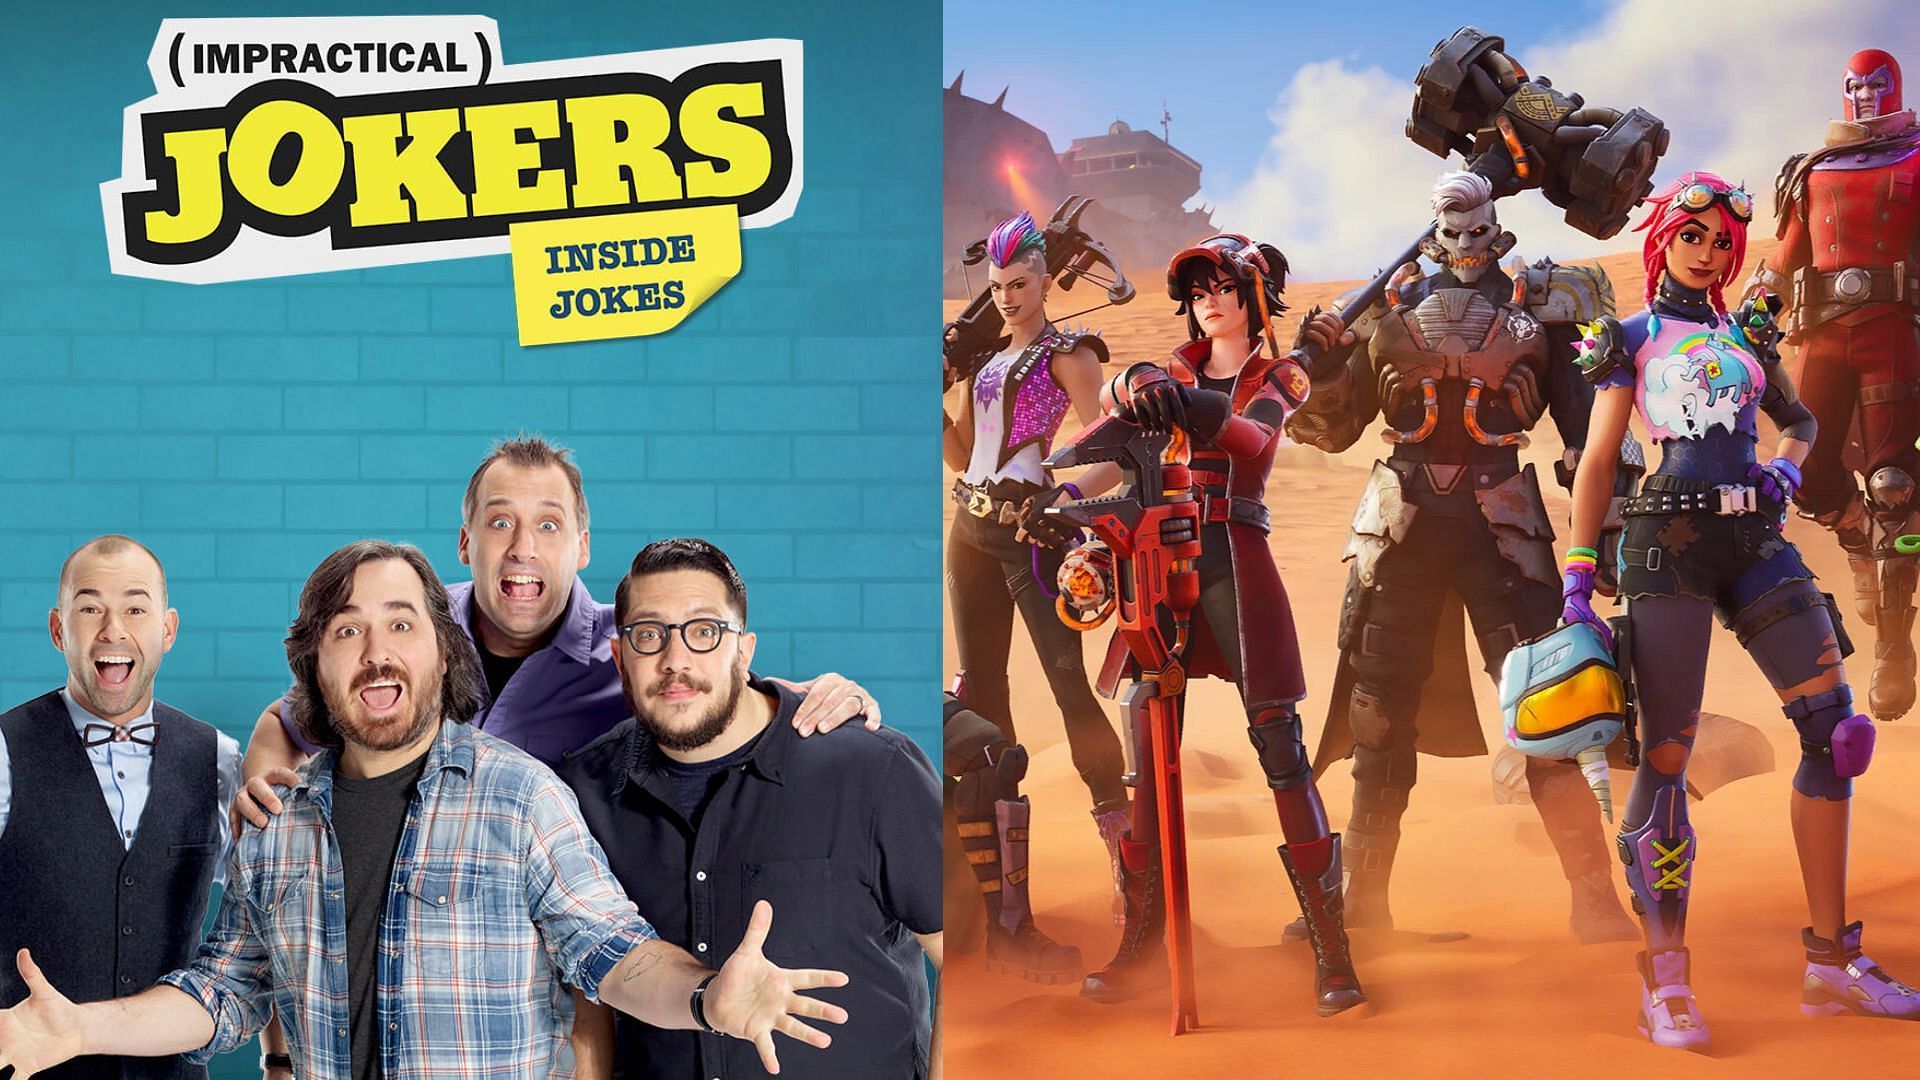 Fortnite X Impractical Jokers collaboration seems to be something fans wants in-game